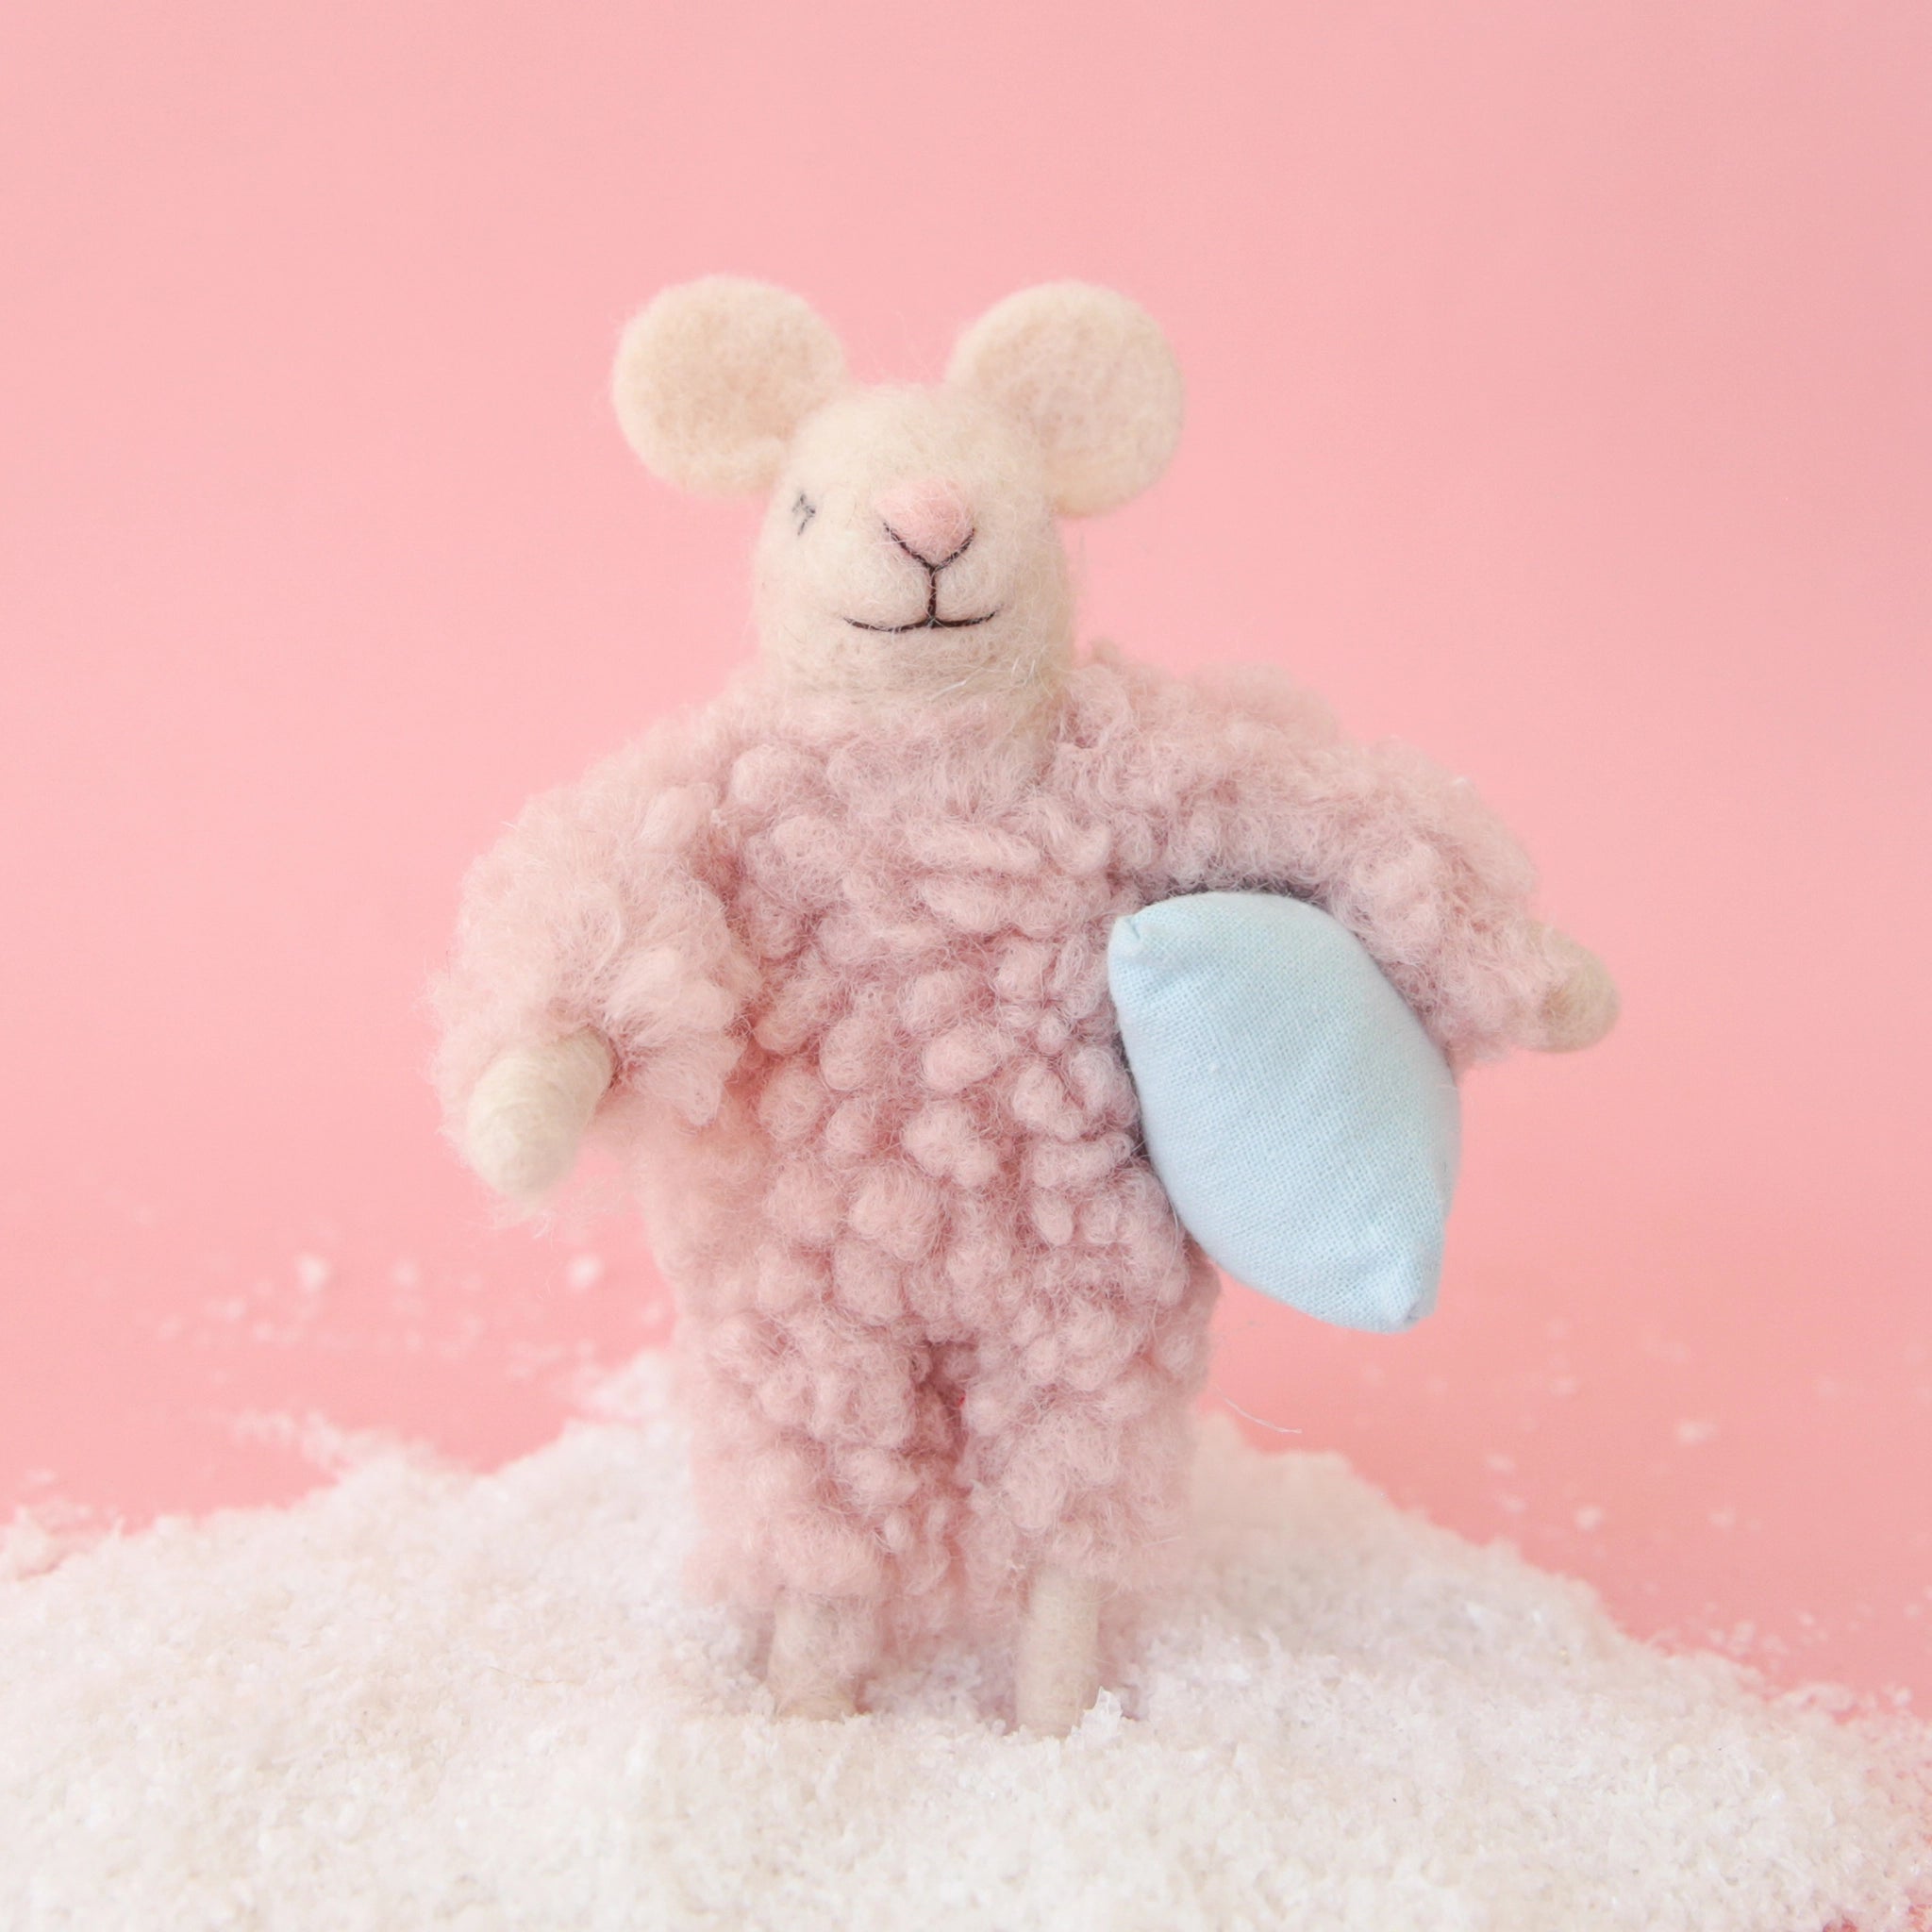 On a pink background is a felt mouse ornament in a cream shade with a fuzzy pink jumpsuit on and holding a pillow.